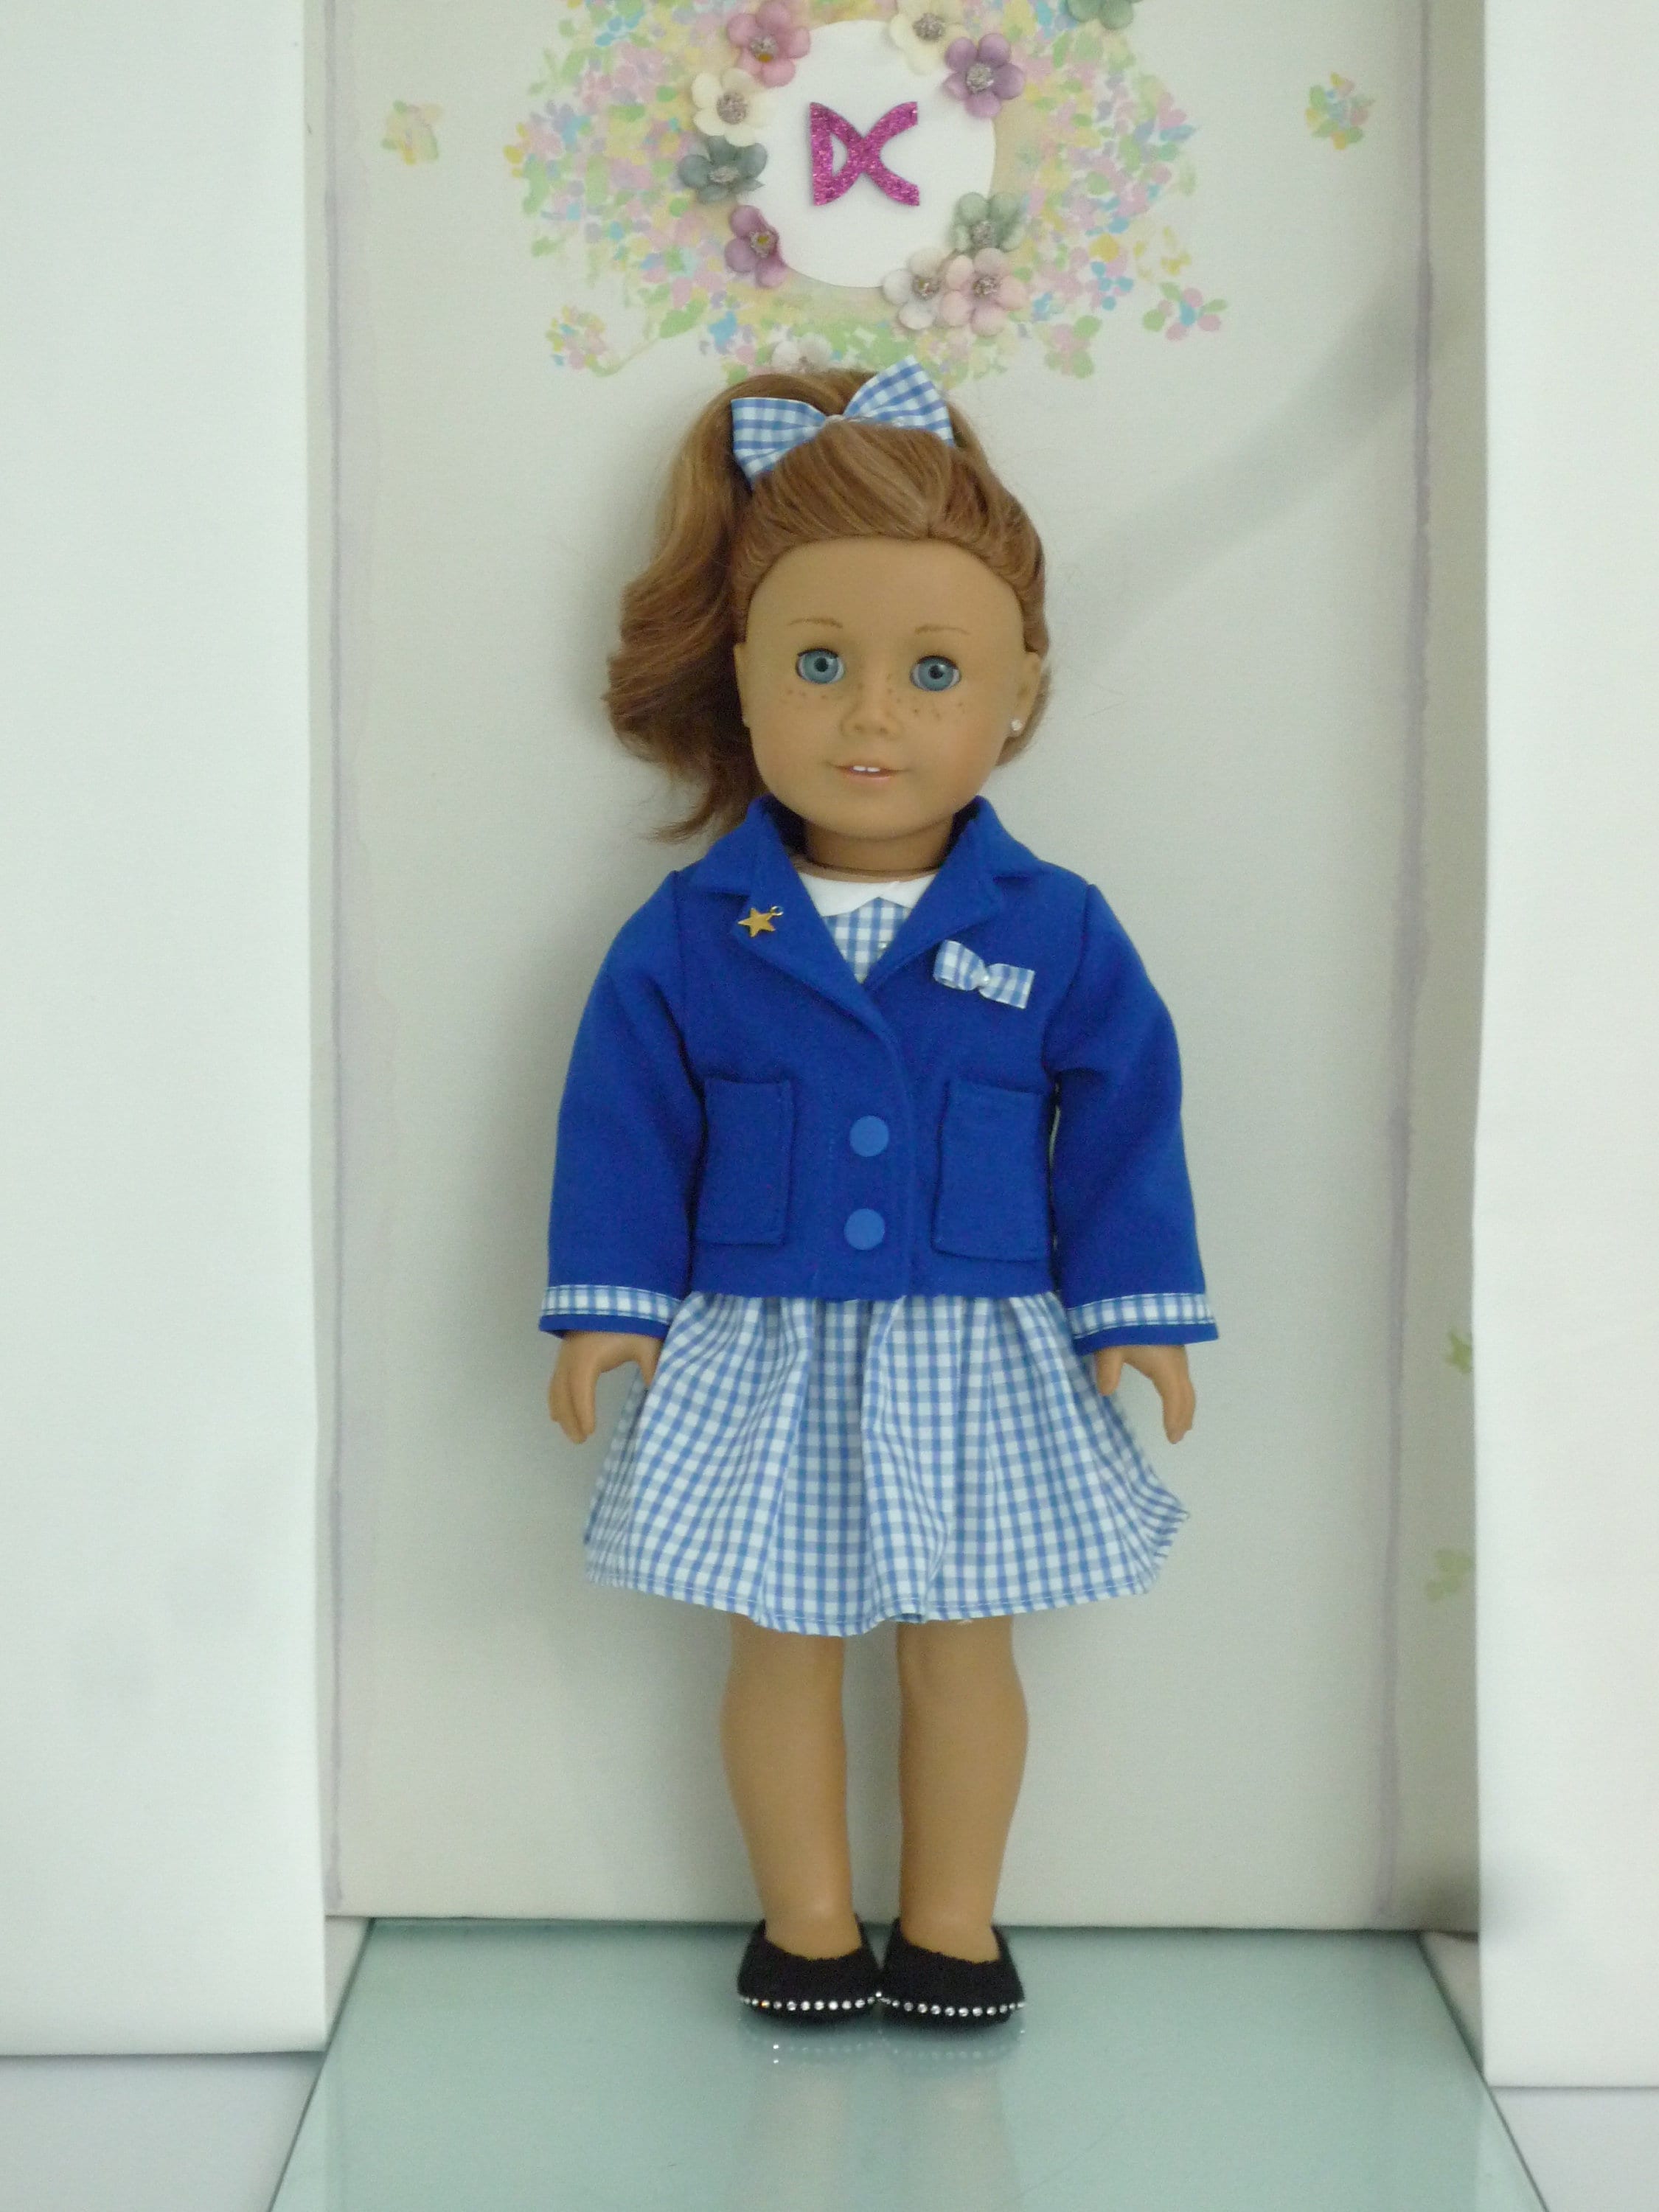 Home and Away Game Reversible Cheerleader Outfit 18 Inch Doll Clothes  Pattern